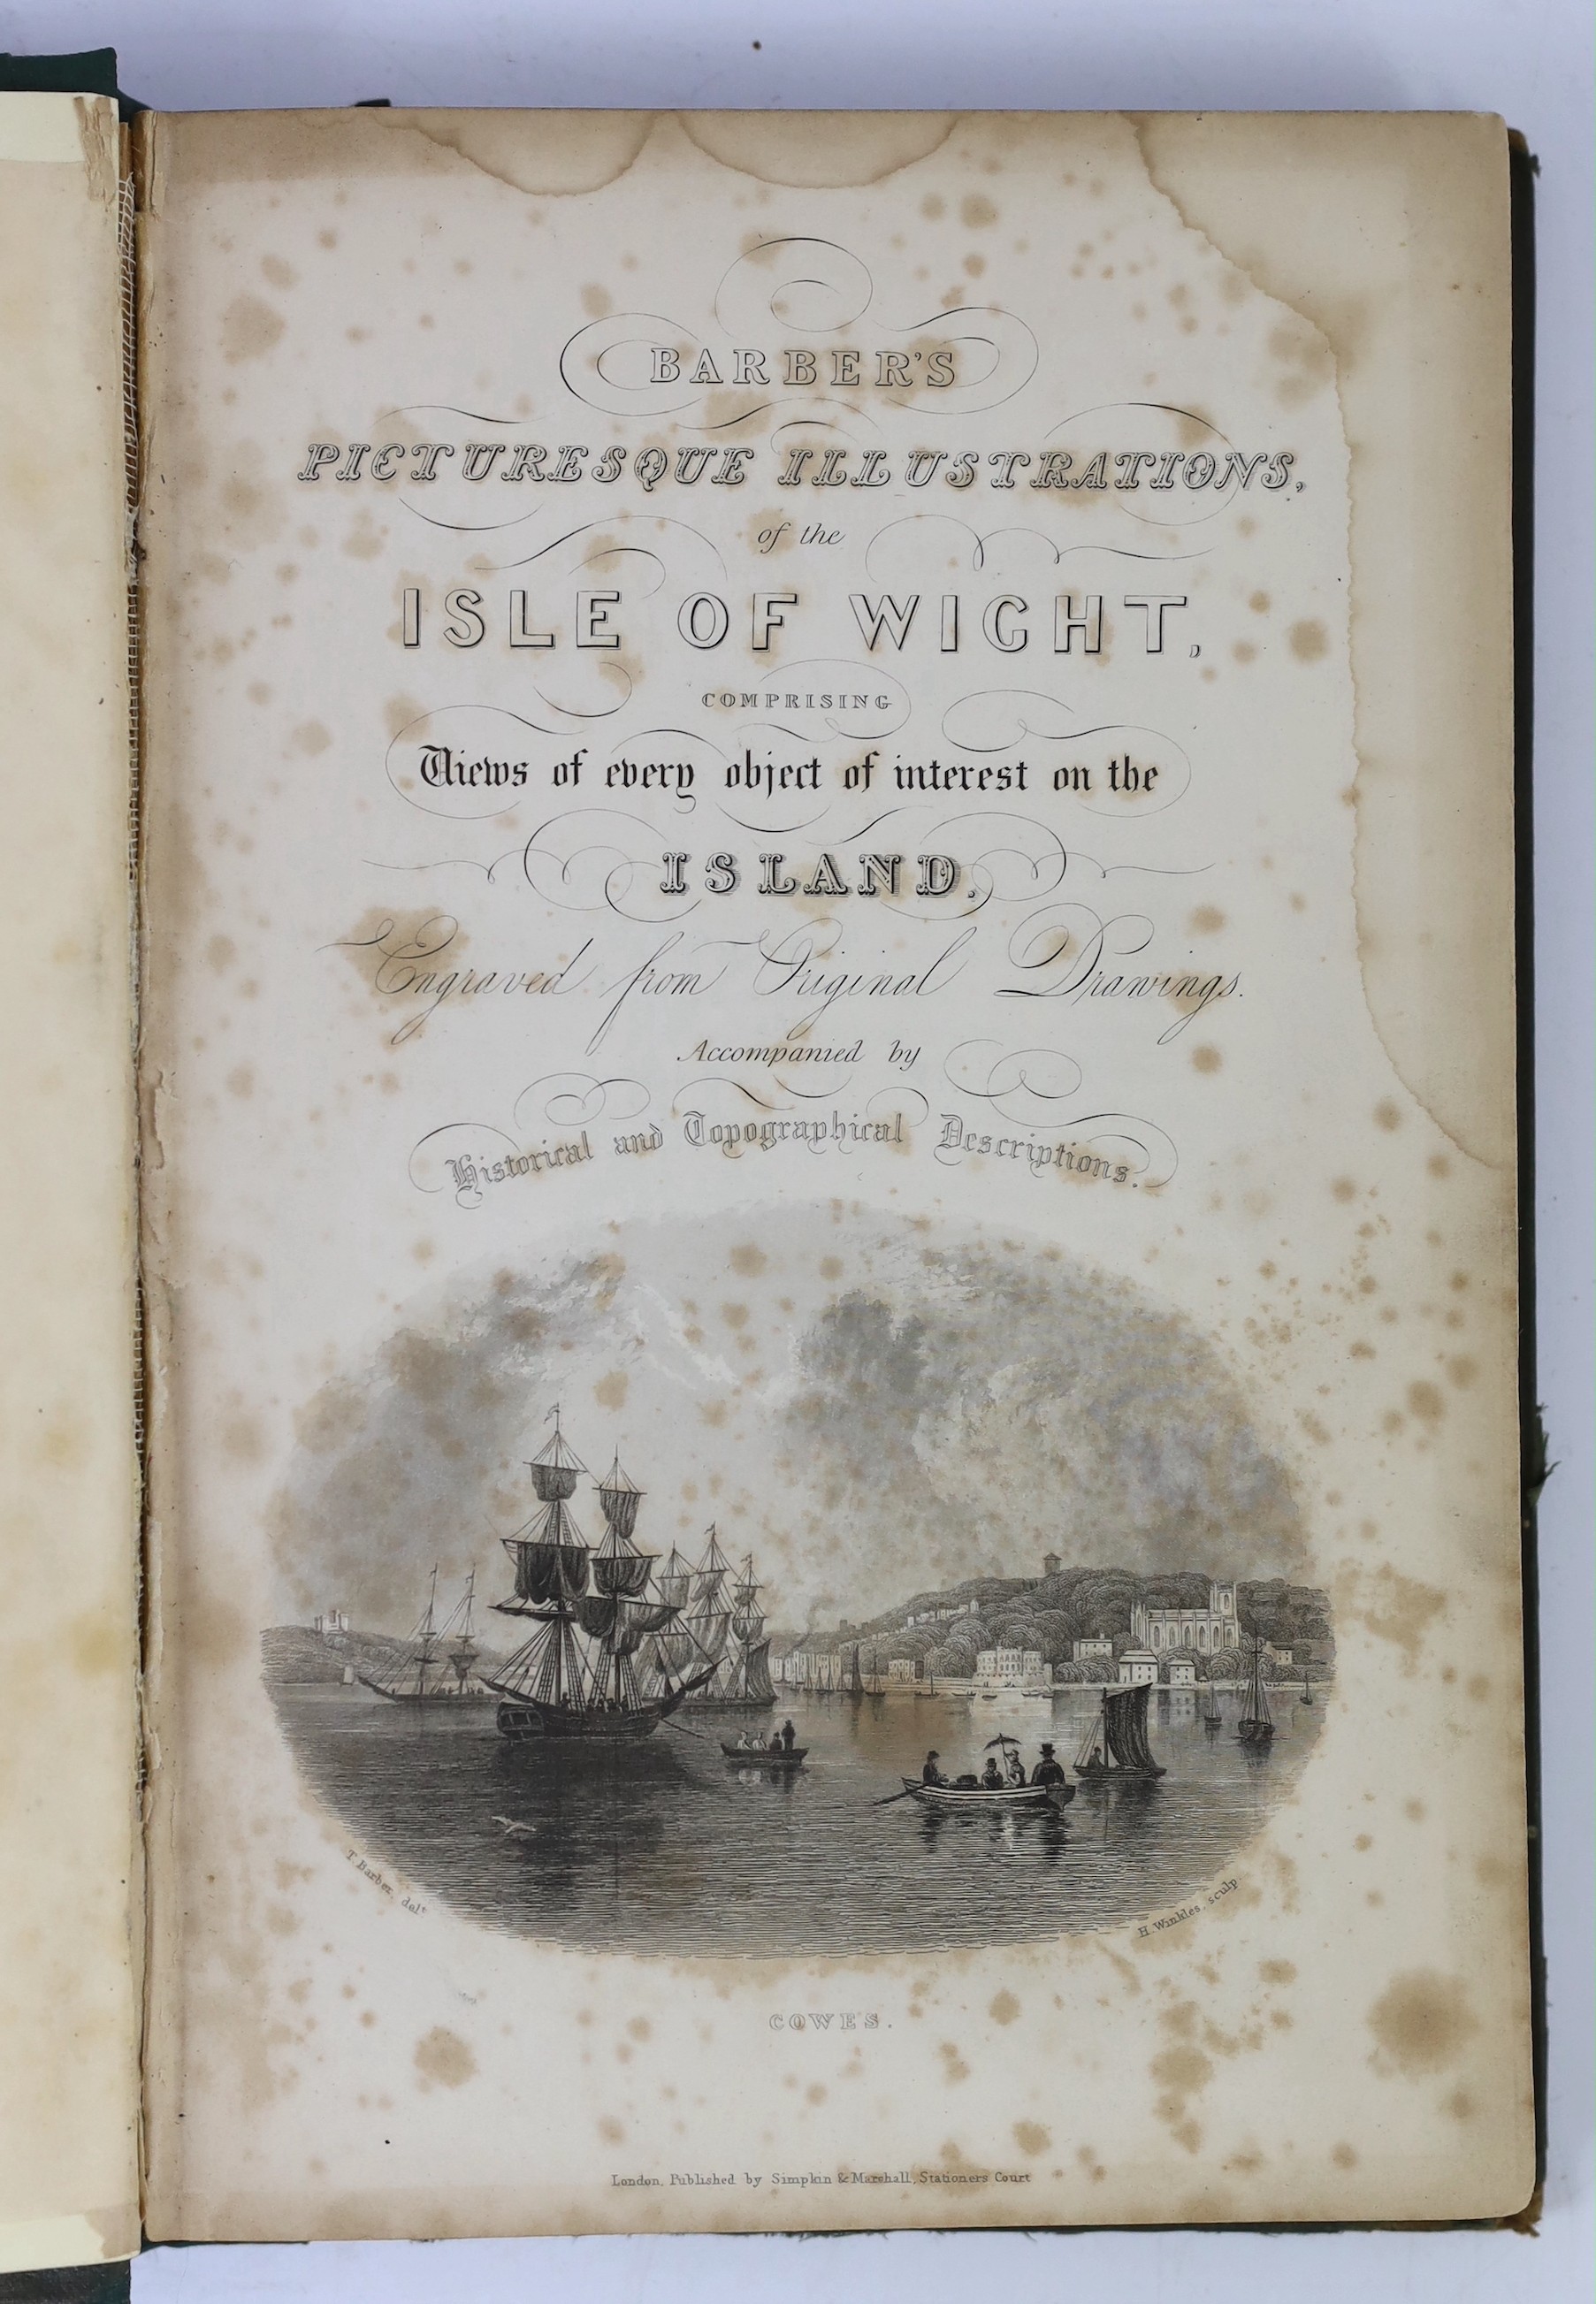 ISLE OF WIGHT: Cooke, William - A New Picture of the Isle of Wight ... an introductory account of the Island and a voyage round its coast. 2nd edition, with improvements. d-page coloured map and 36 plates